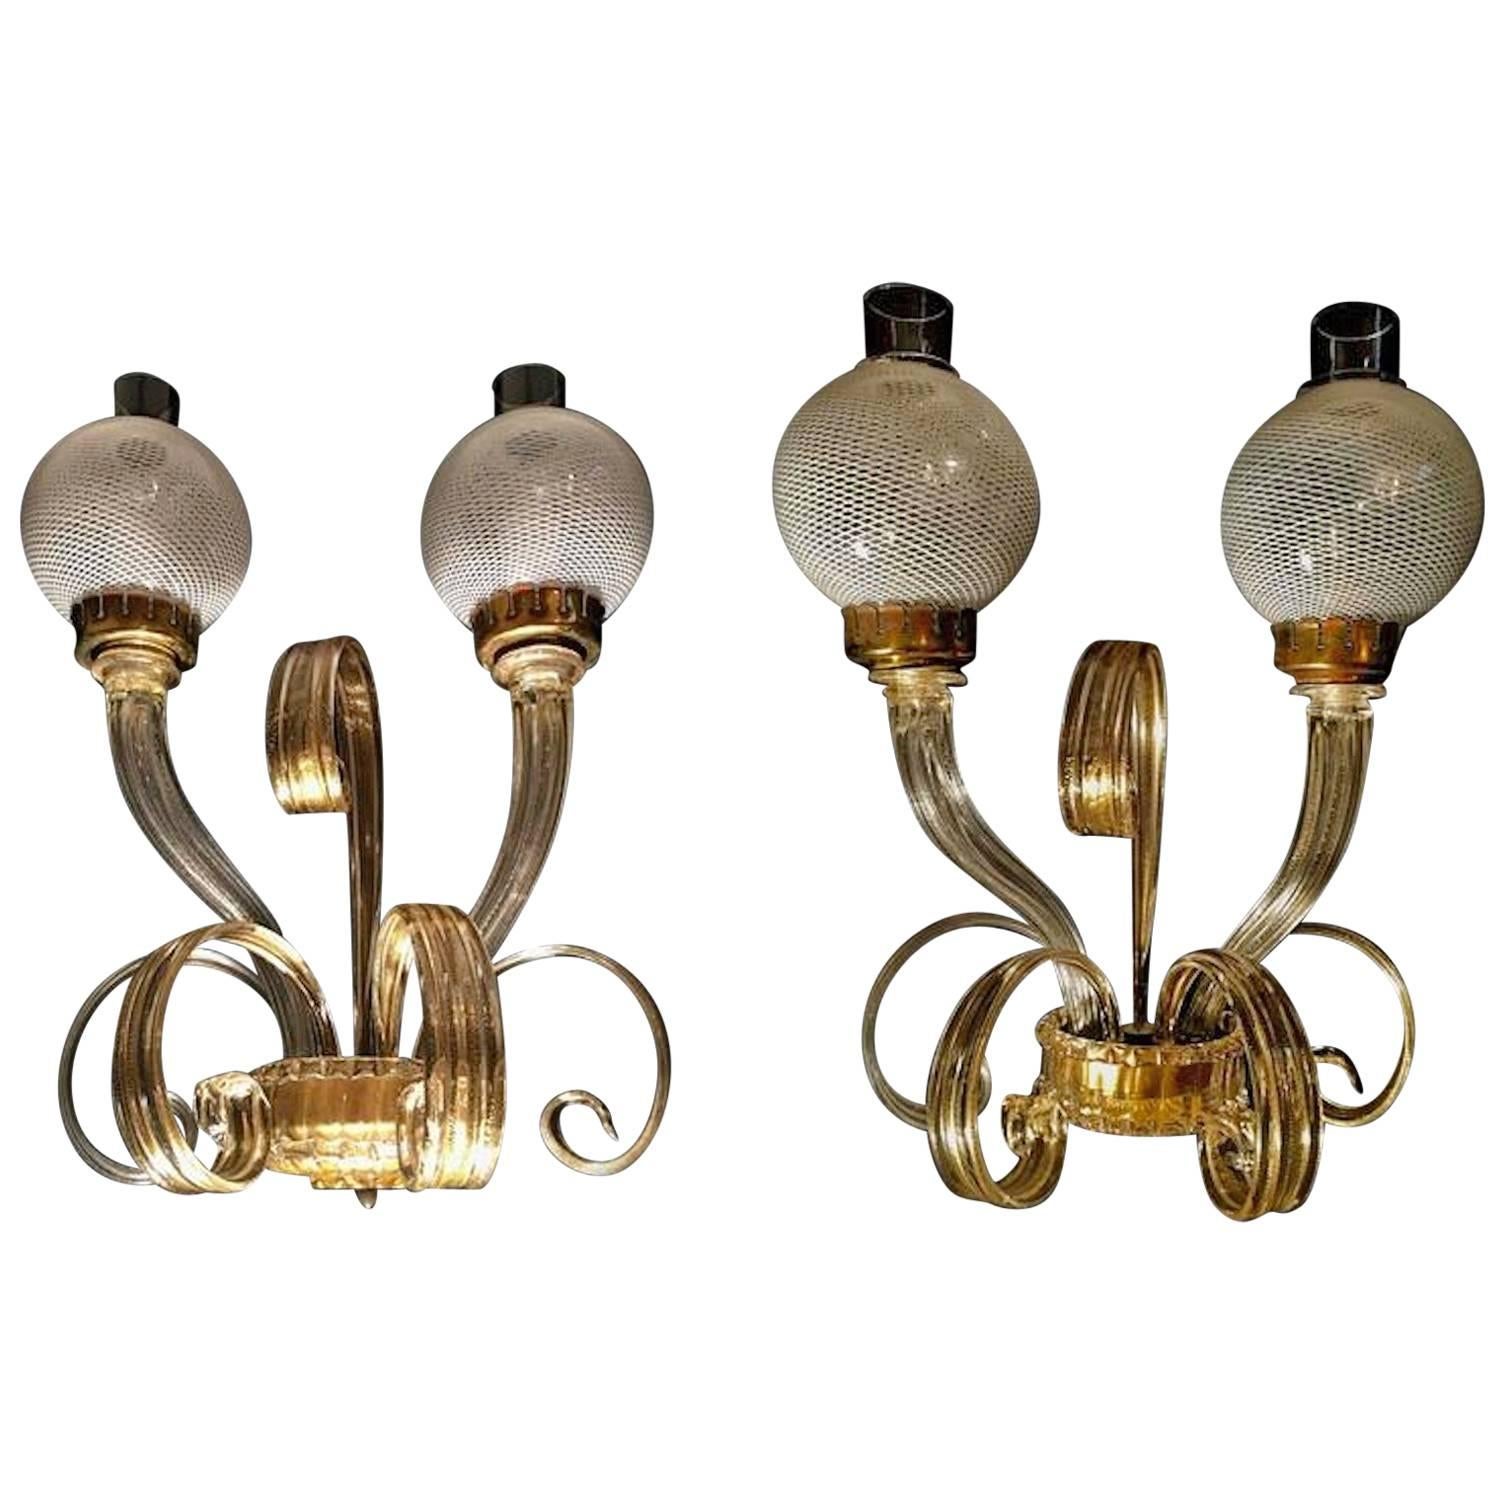 There are no words to describe this wall lights. To exalt at the same time a luxurious and refined space. Together with two other pairs of sconces are from a historic Italian hotel.